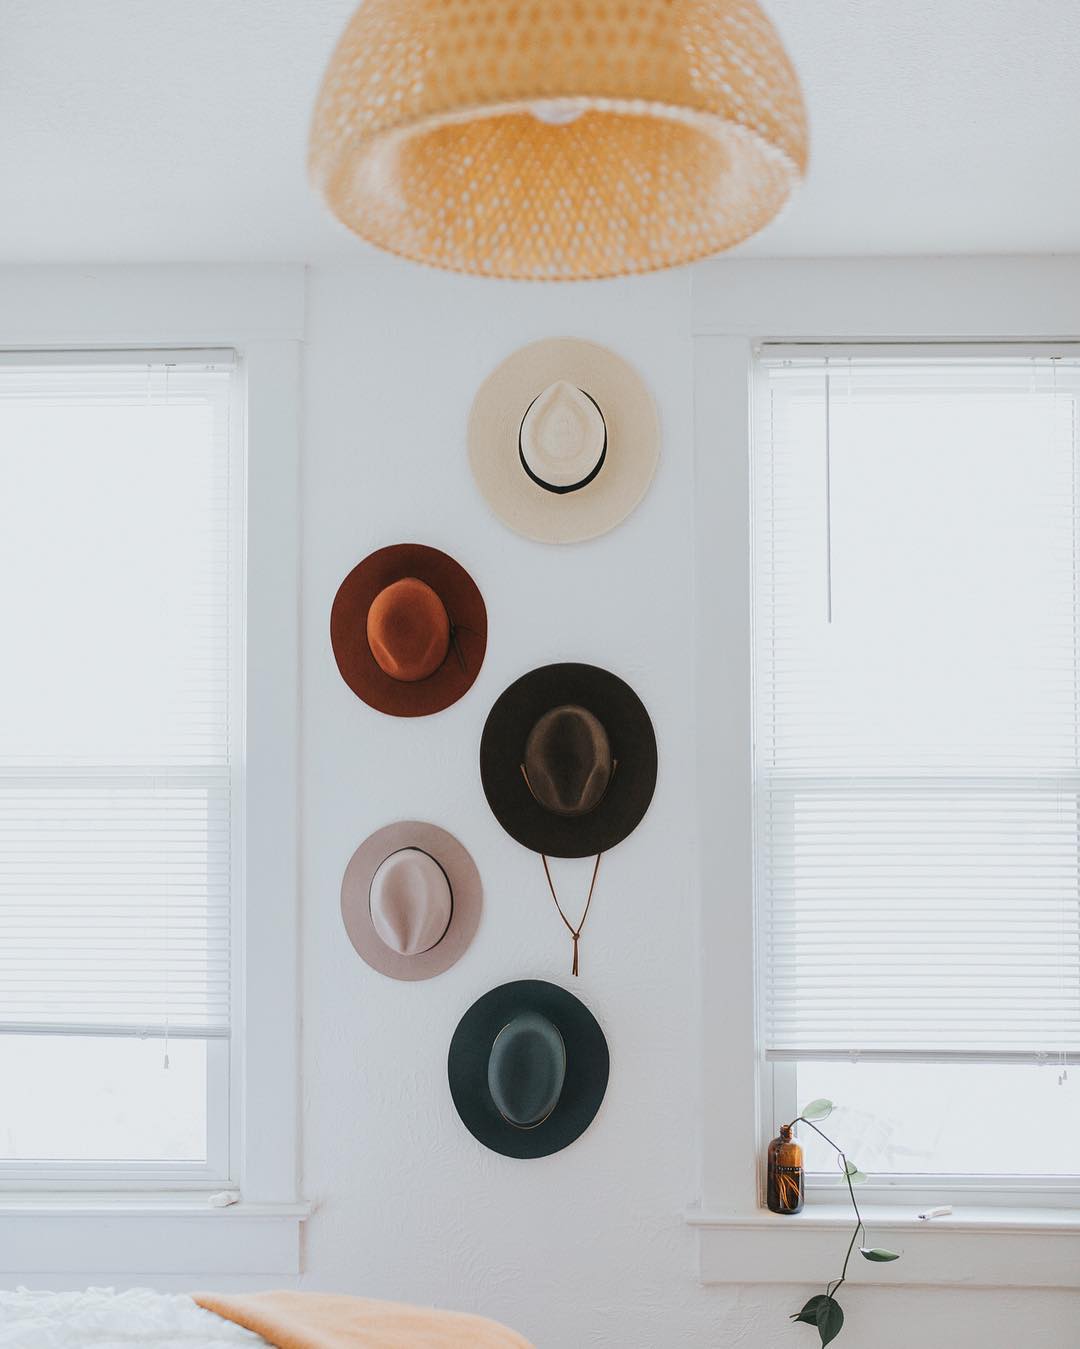 Hipster hats hanging on wall in bedroom. Photo by Instagram user @kaleyfromkansas